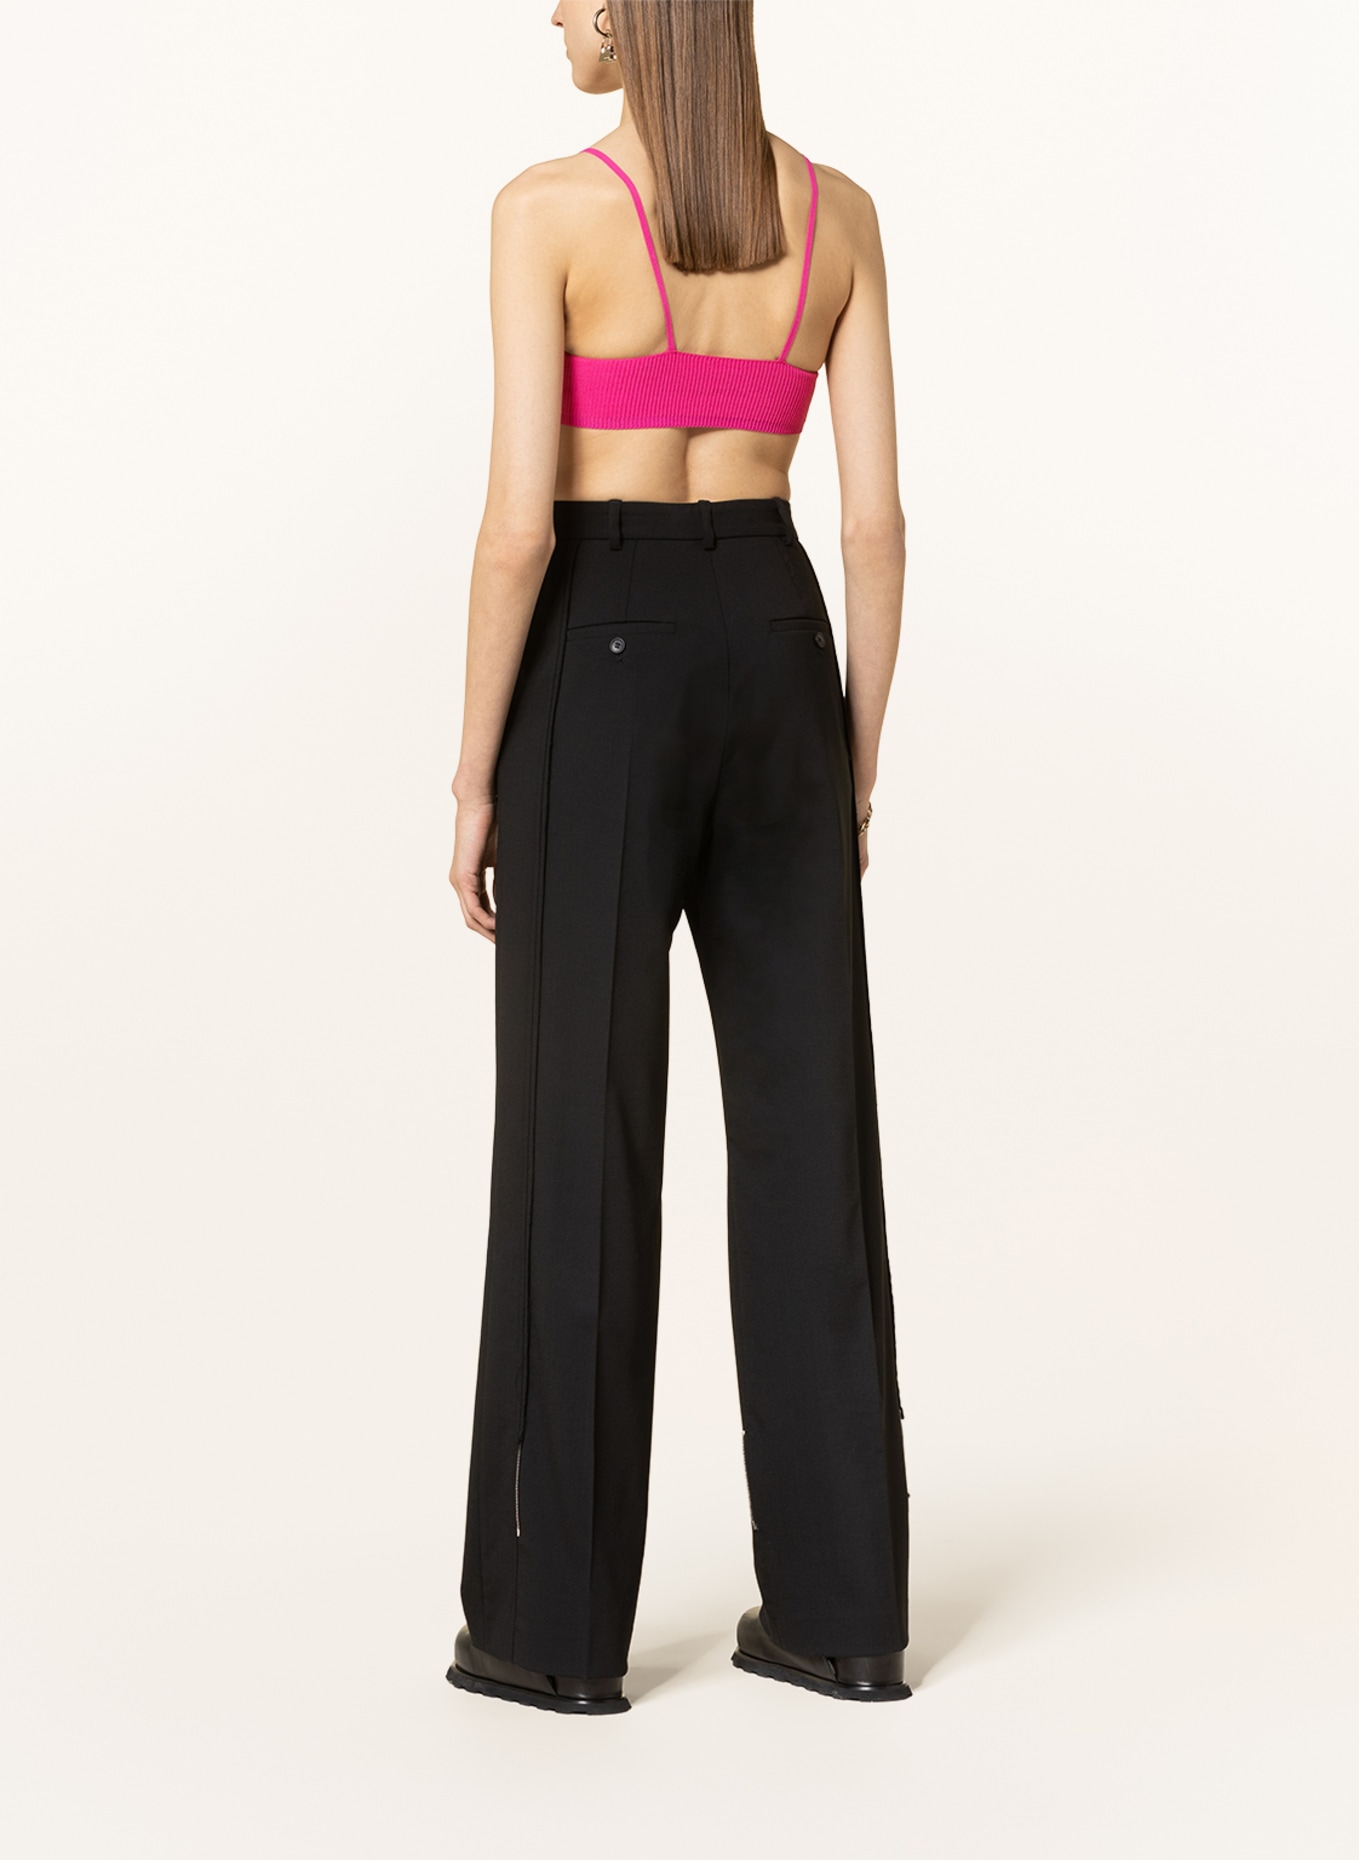 JACQUEMUS Cropped-Stricktop LE BANDEAU VALENSOLE, Farbe: PINK (Bild 3)